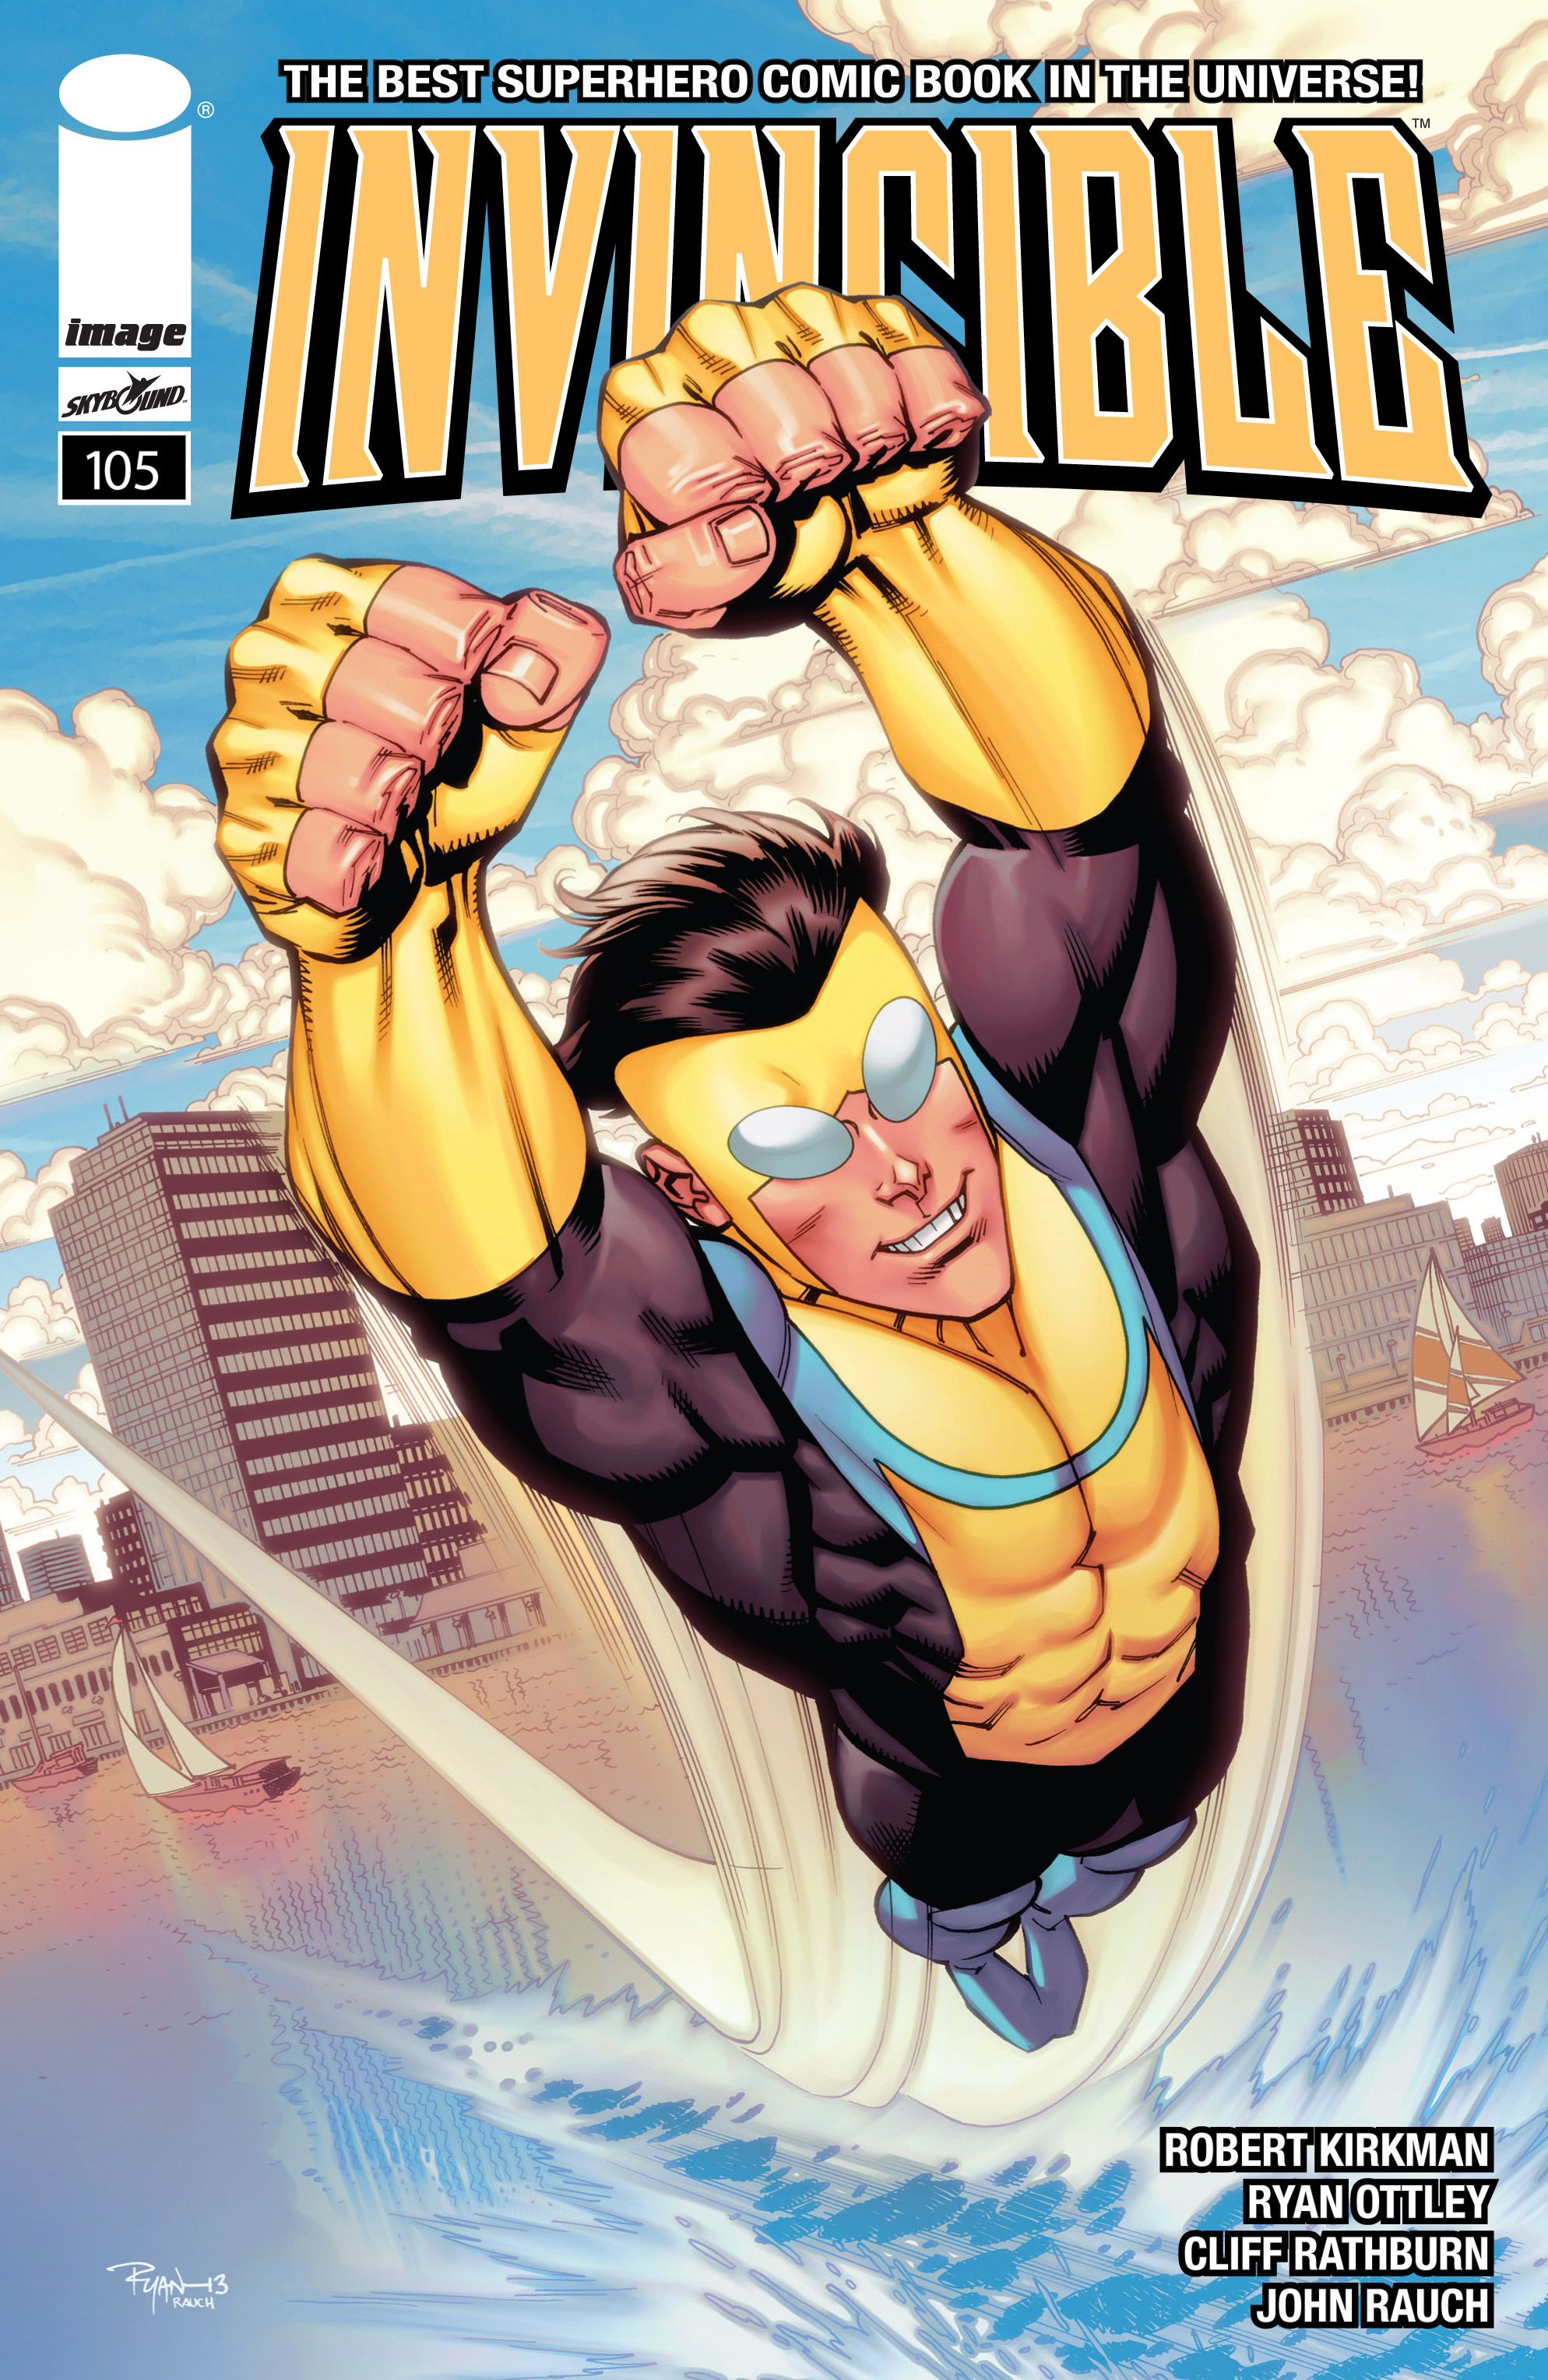 Read online Invincible comic - Issue #105 - 1. Online read comic and downlo...